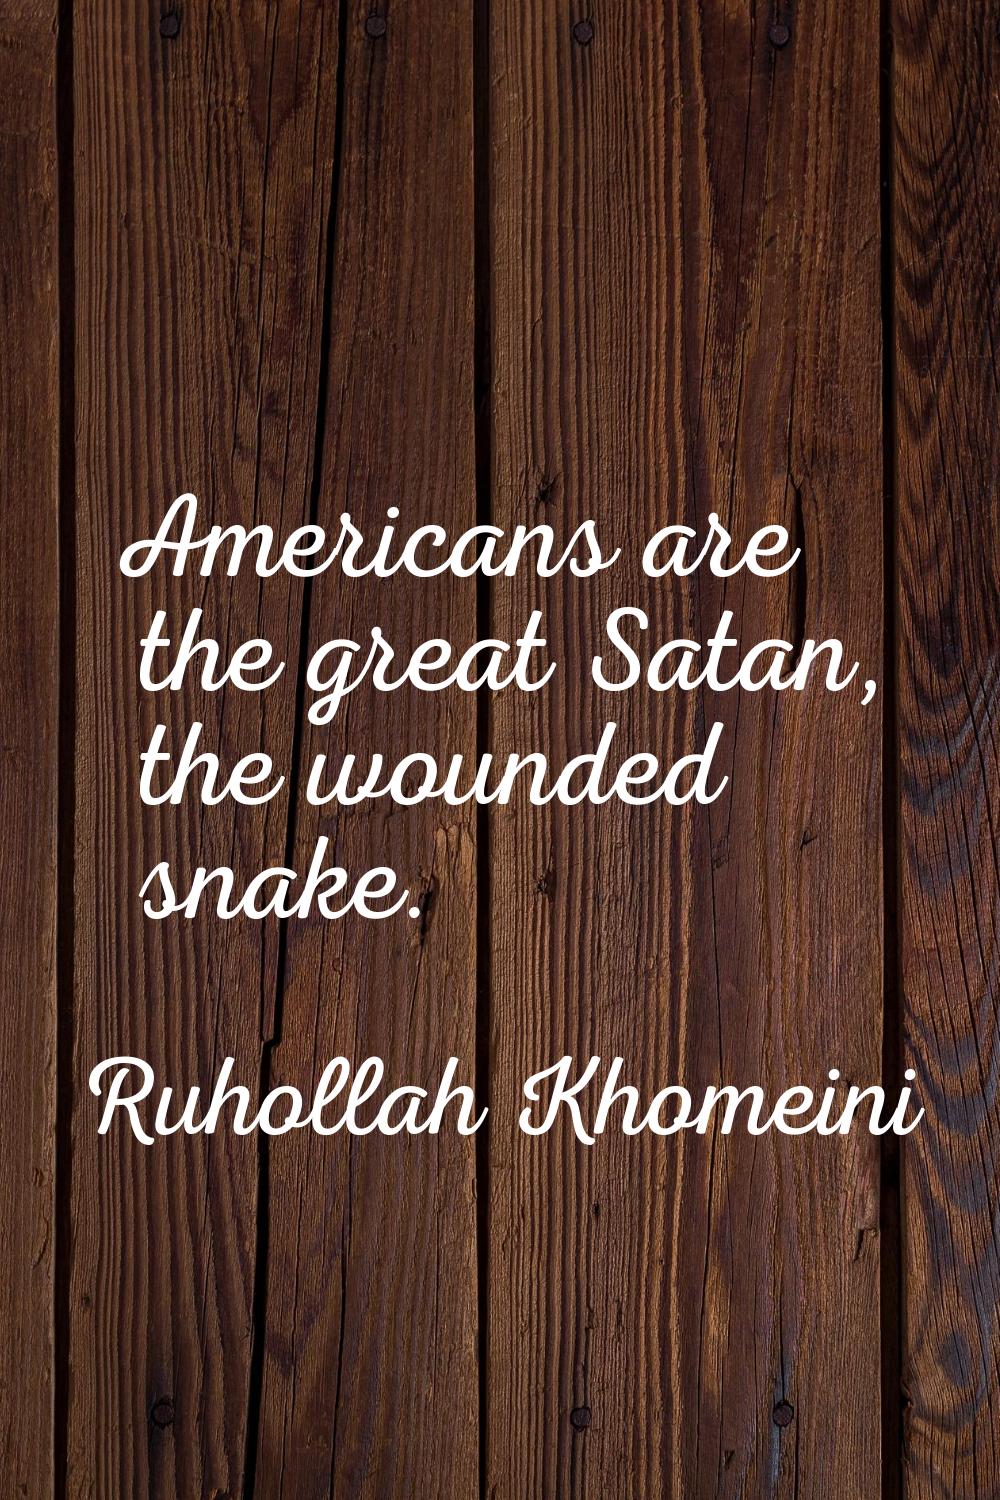 Americans are the great Satan, the wounded snake.